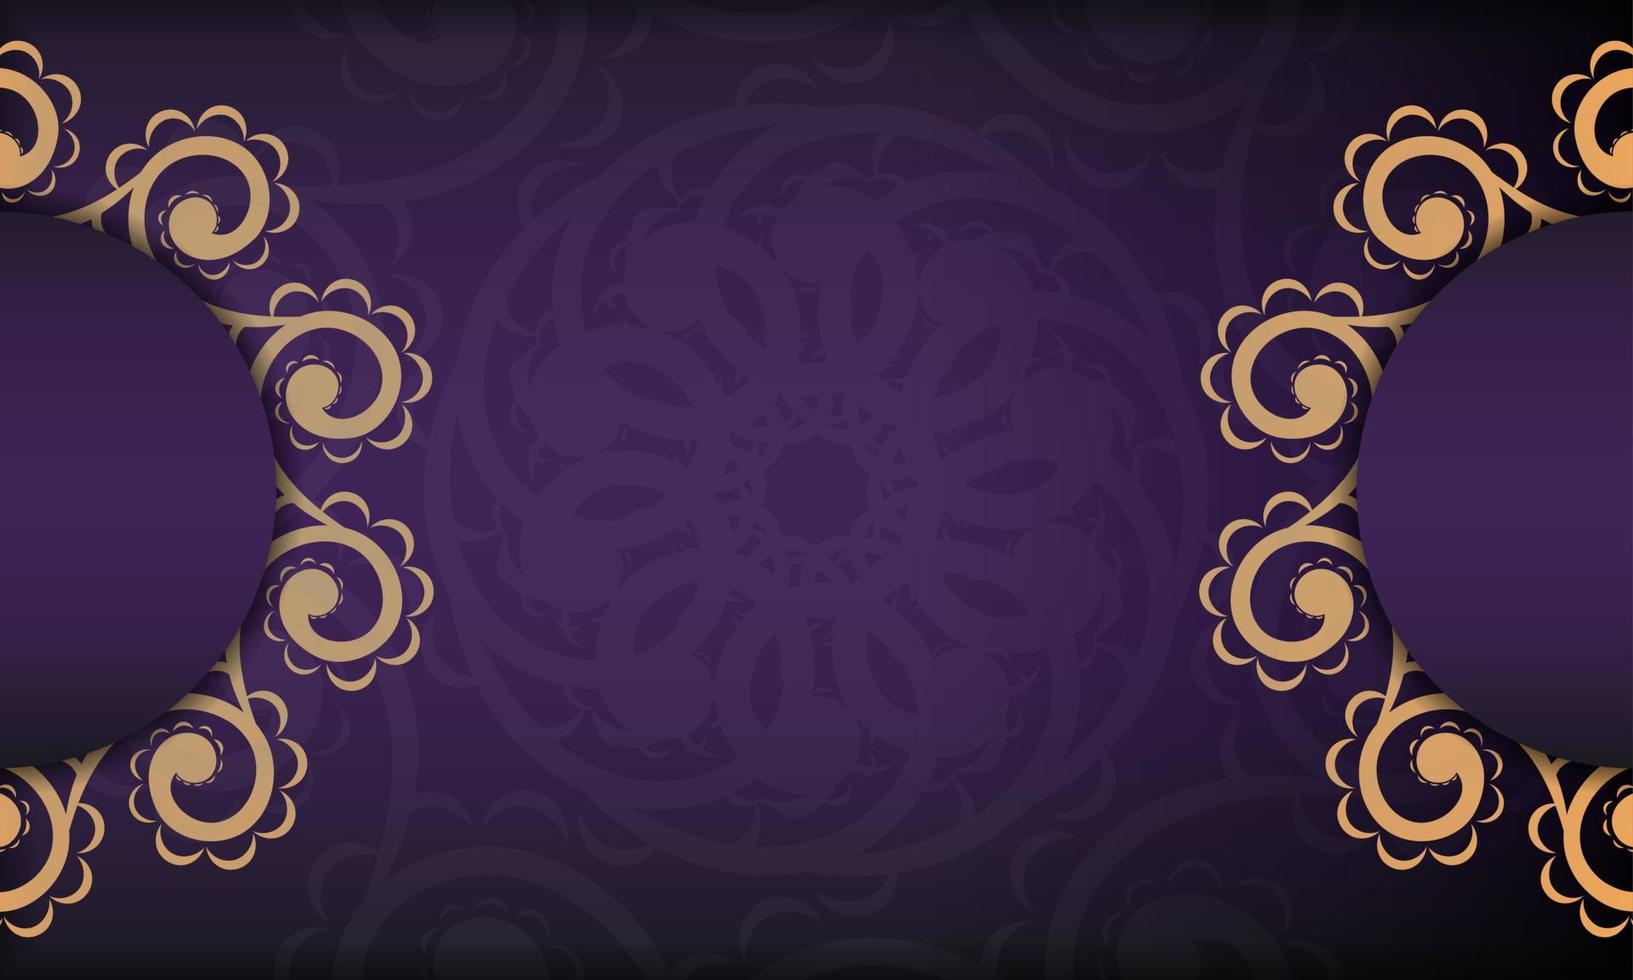 Luxurious purple postcard template with vintage abstract ornament. Elegant and classic elements are great for decorating. Vector illustration.